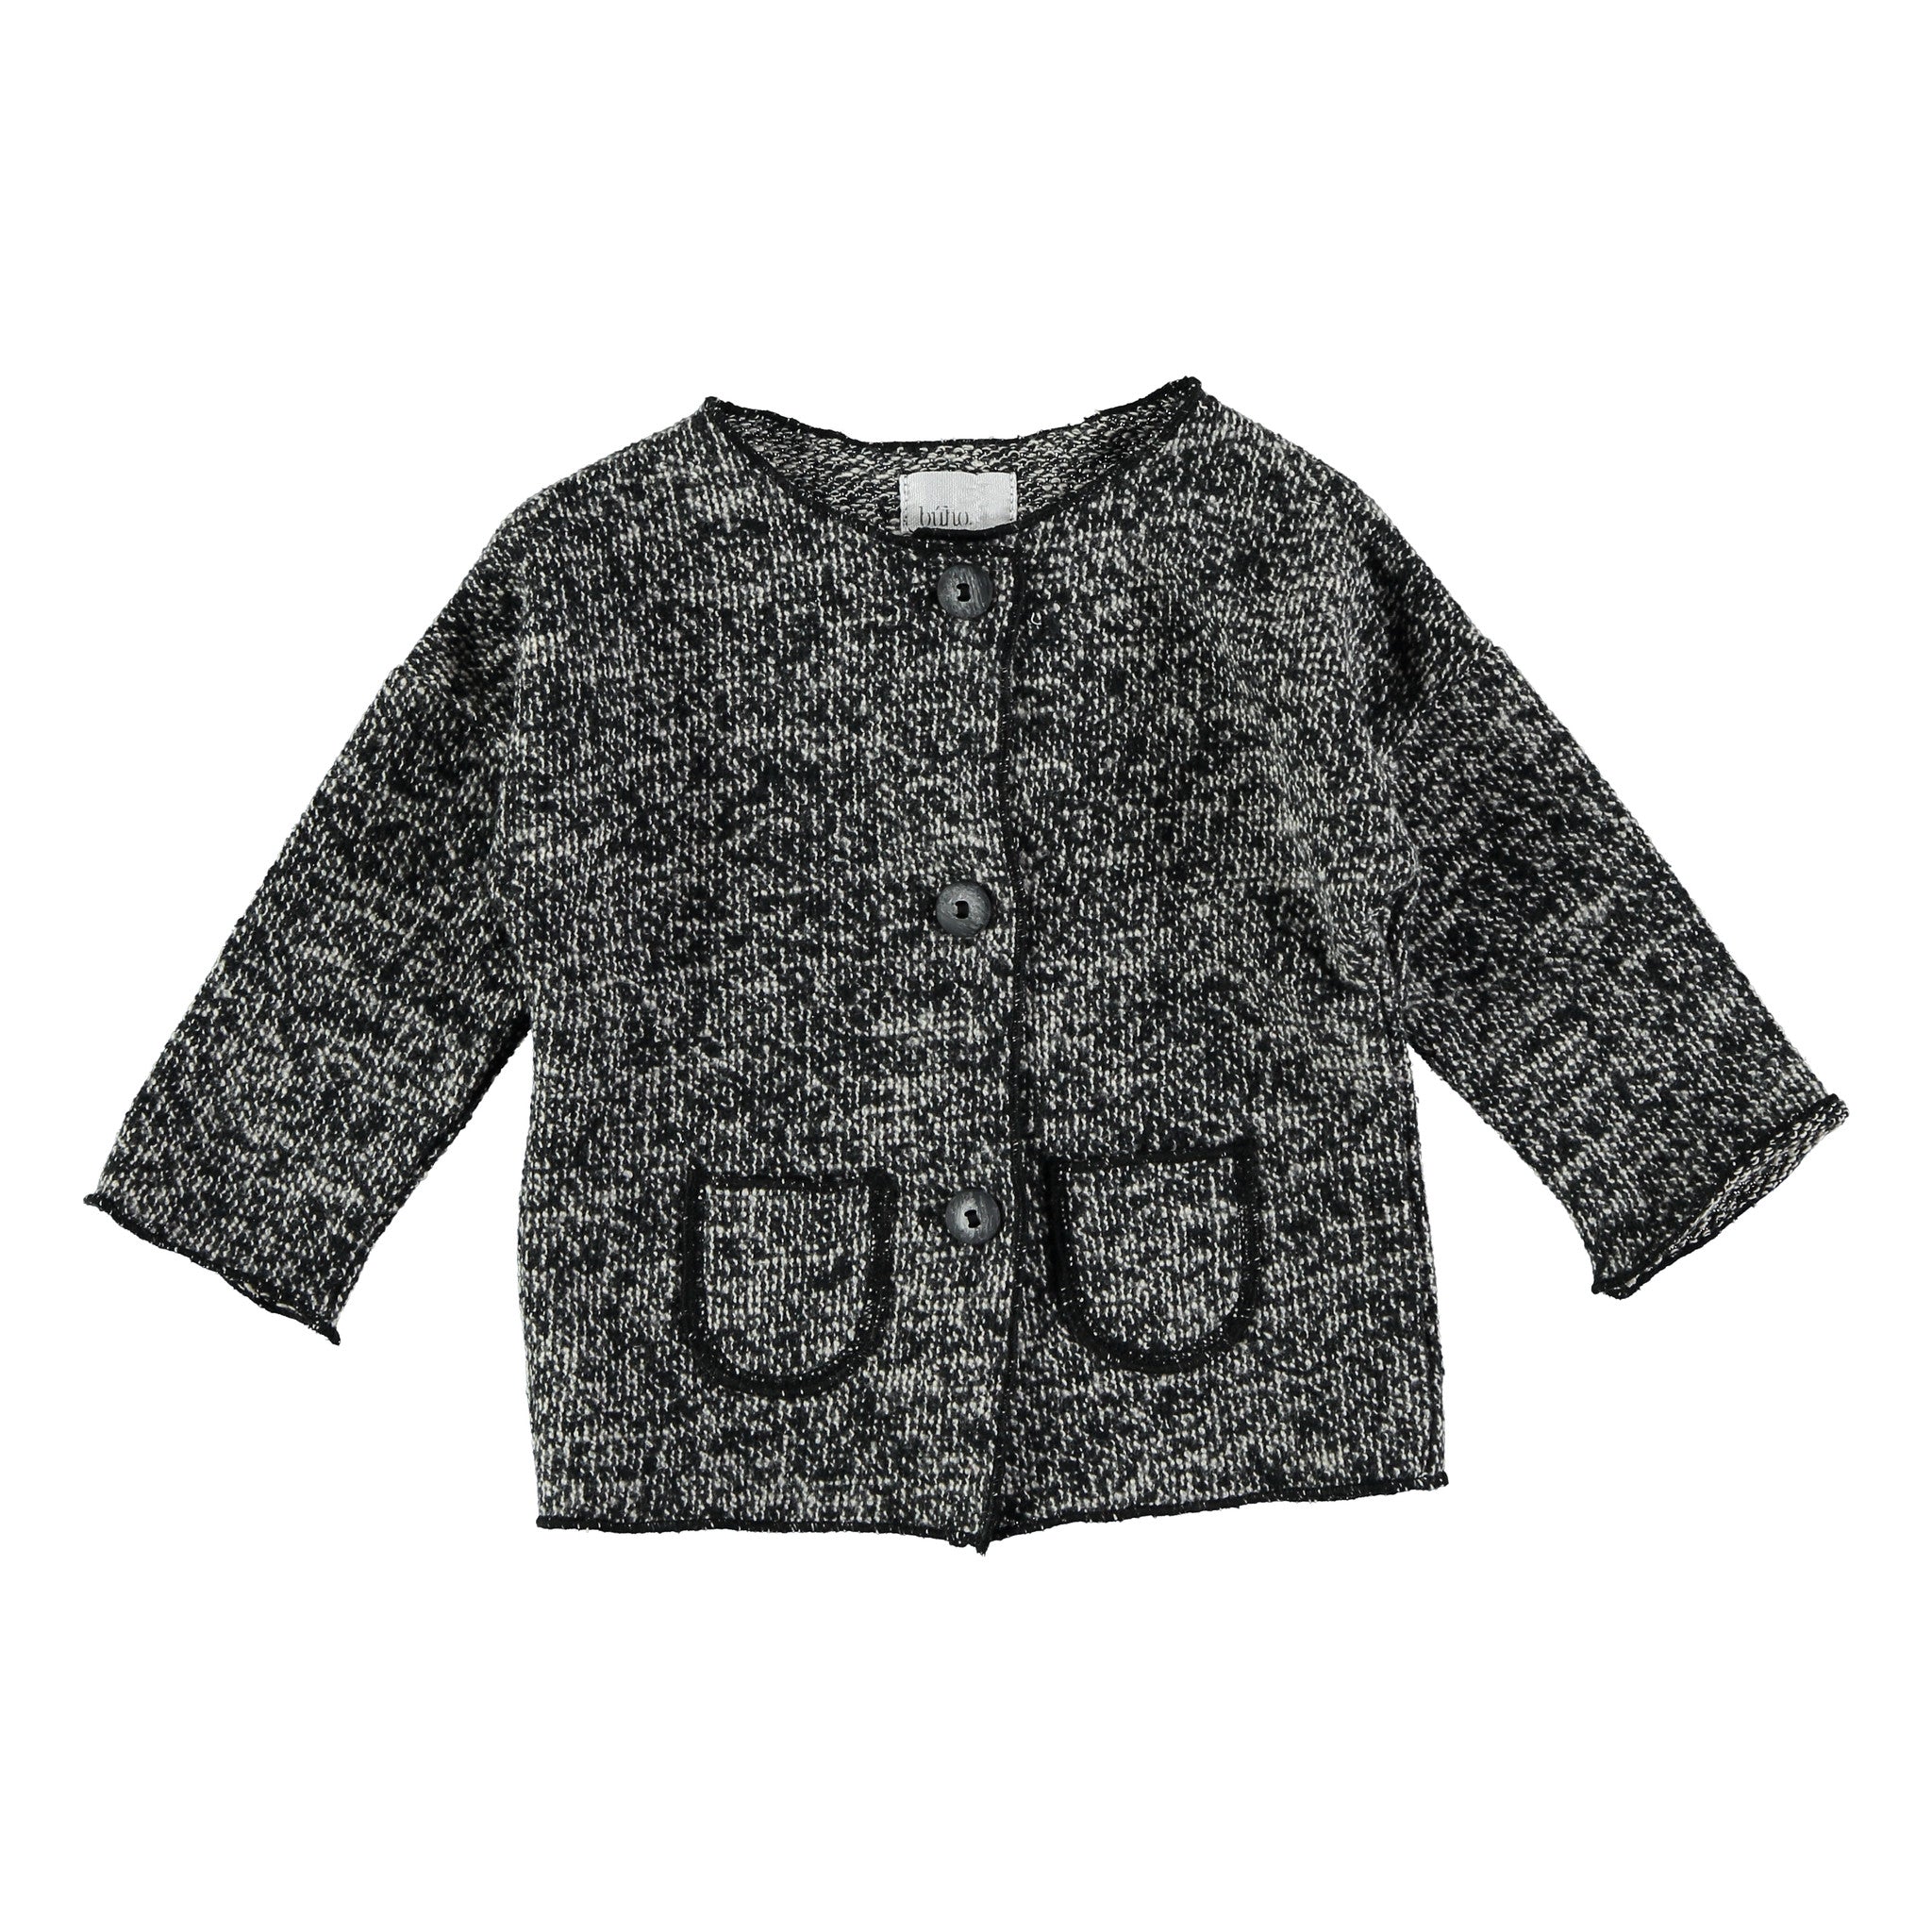 Sweet Baby Girl Cardi by Buho at Bonjour Baby Baskets